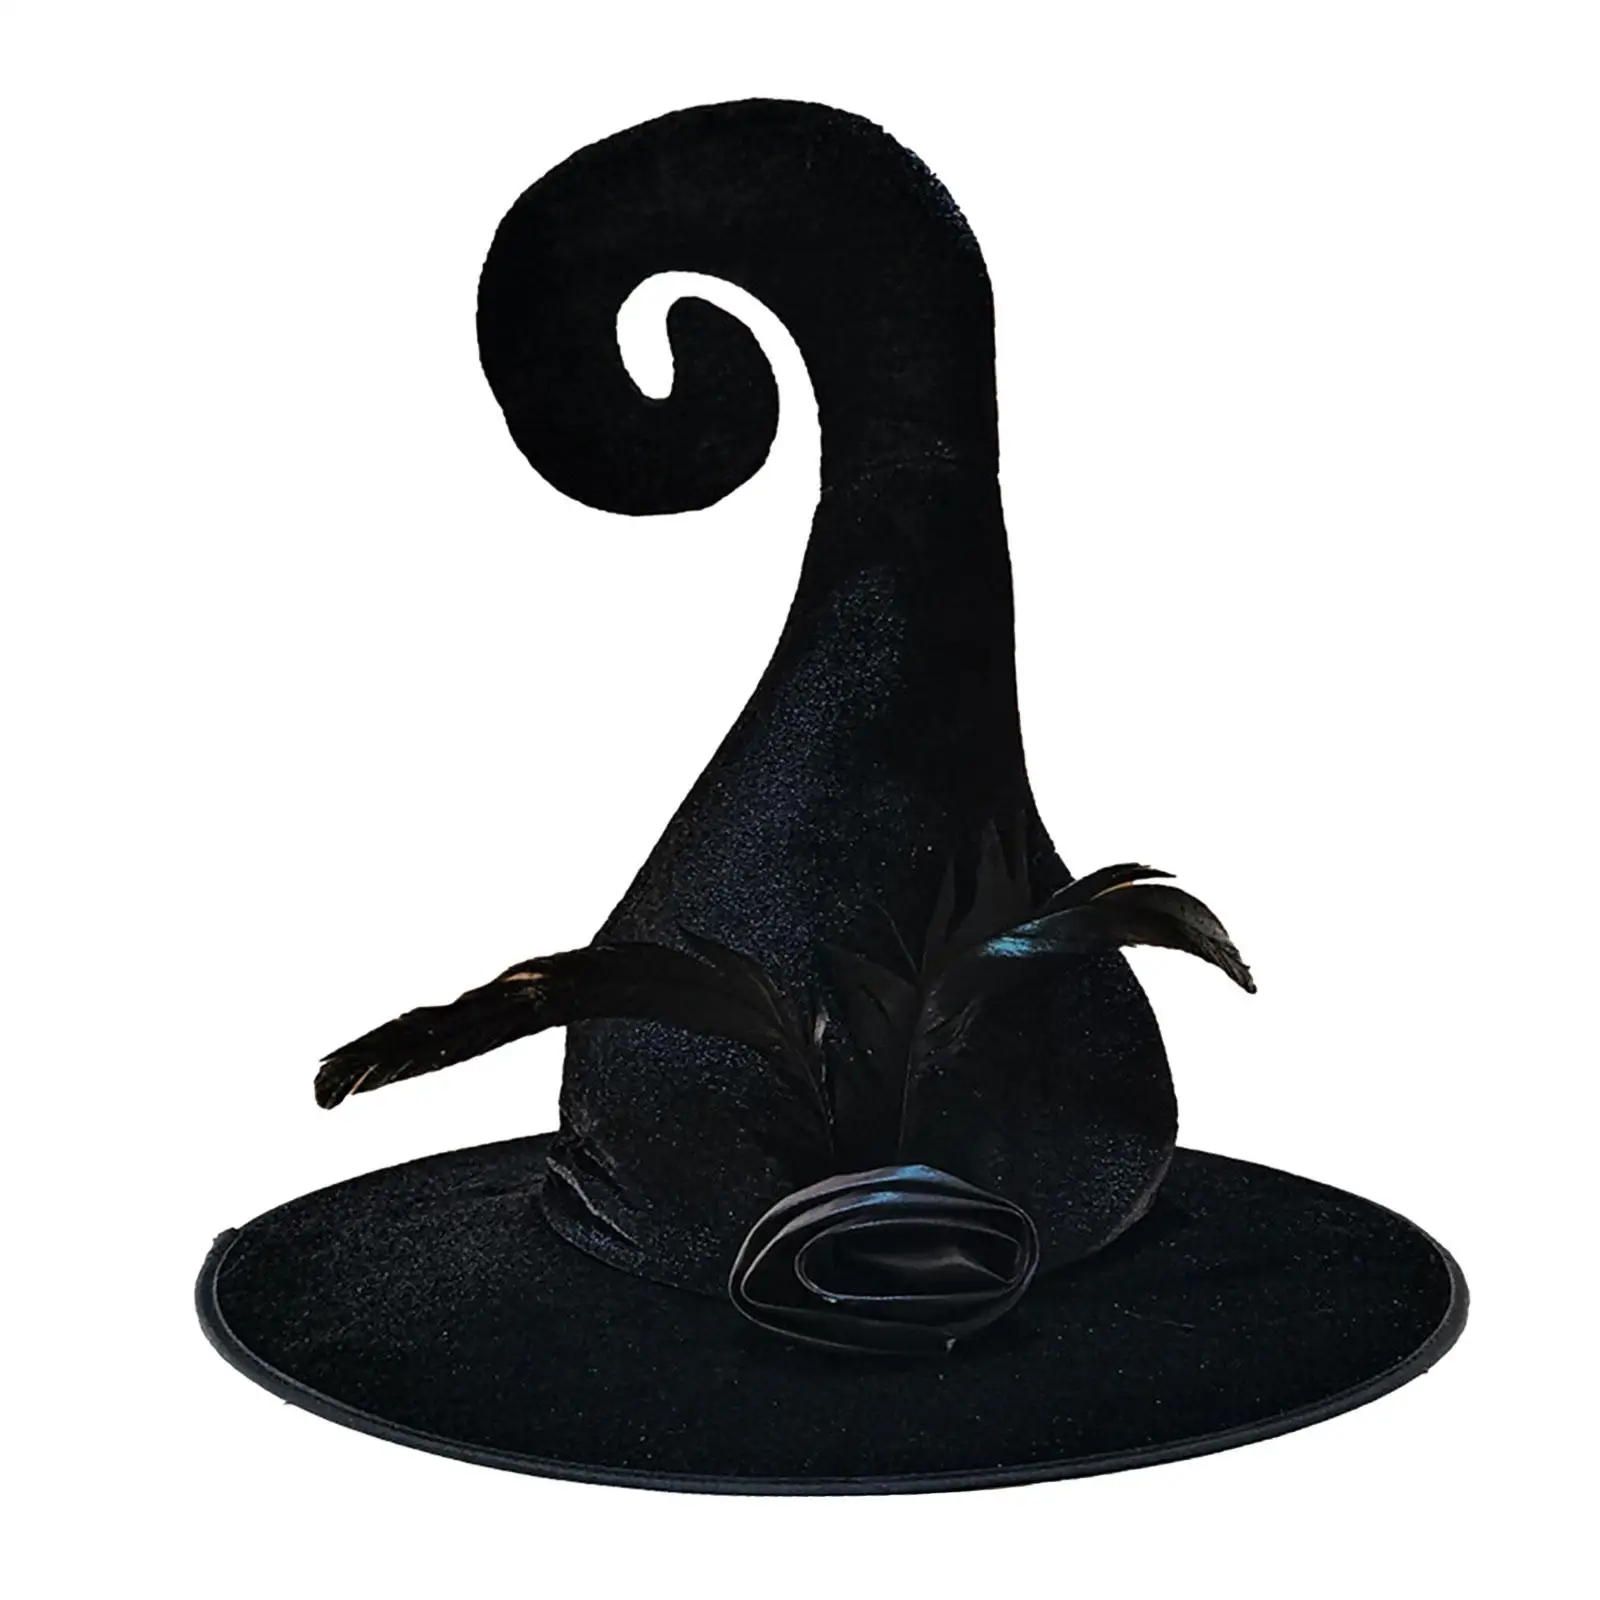 

Witch Women Men Hat Cap Character with Roses Feathers Black Adult Hats for Halloween Masquerade Carnivals Fancy Dress Cosplay